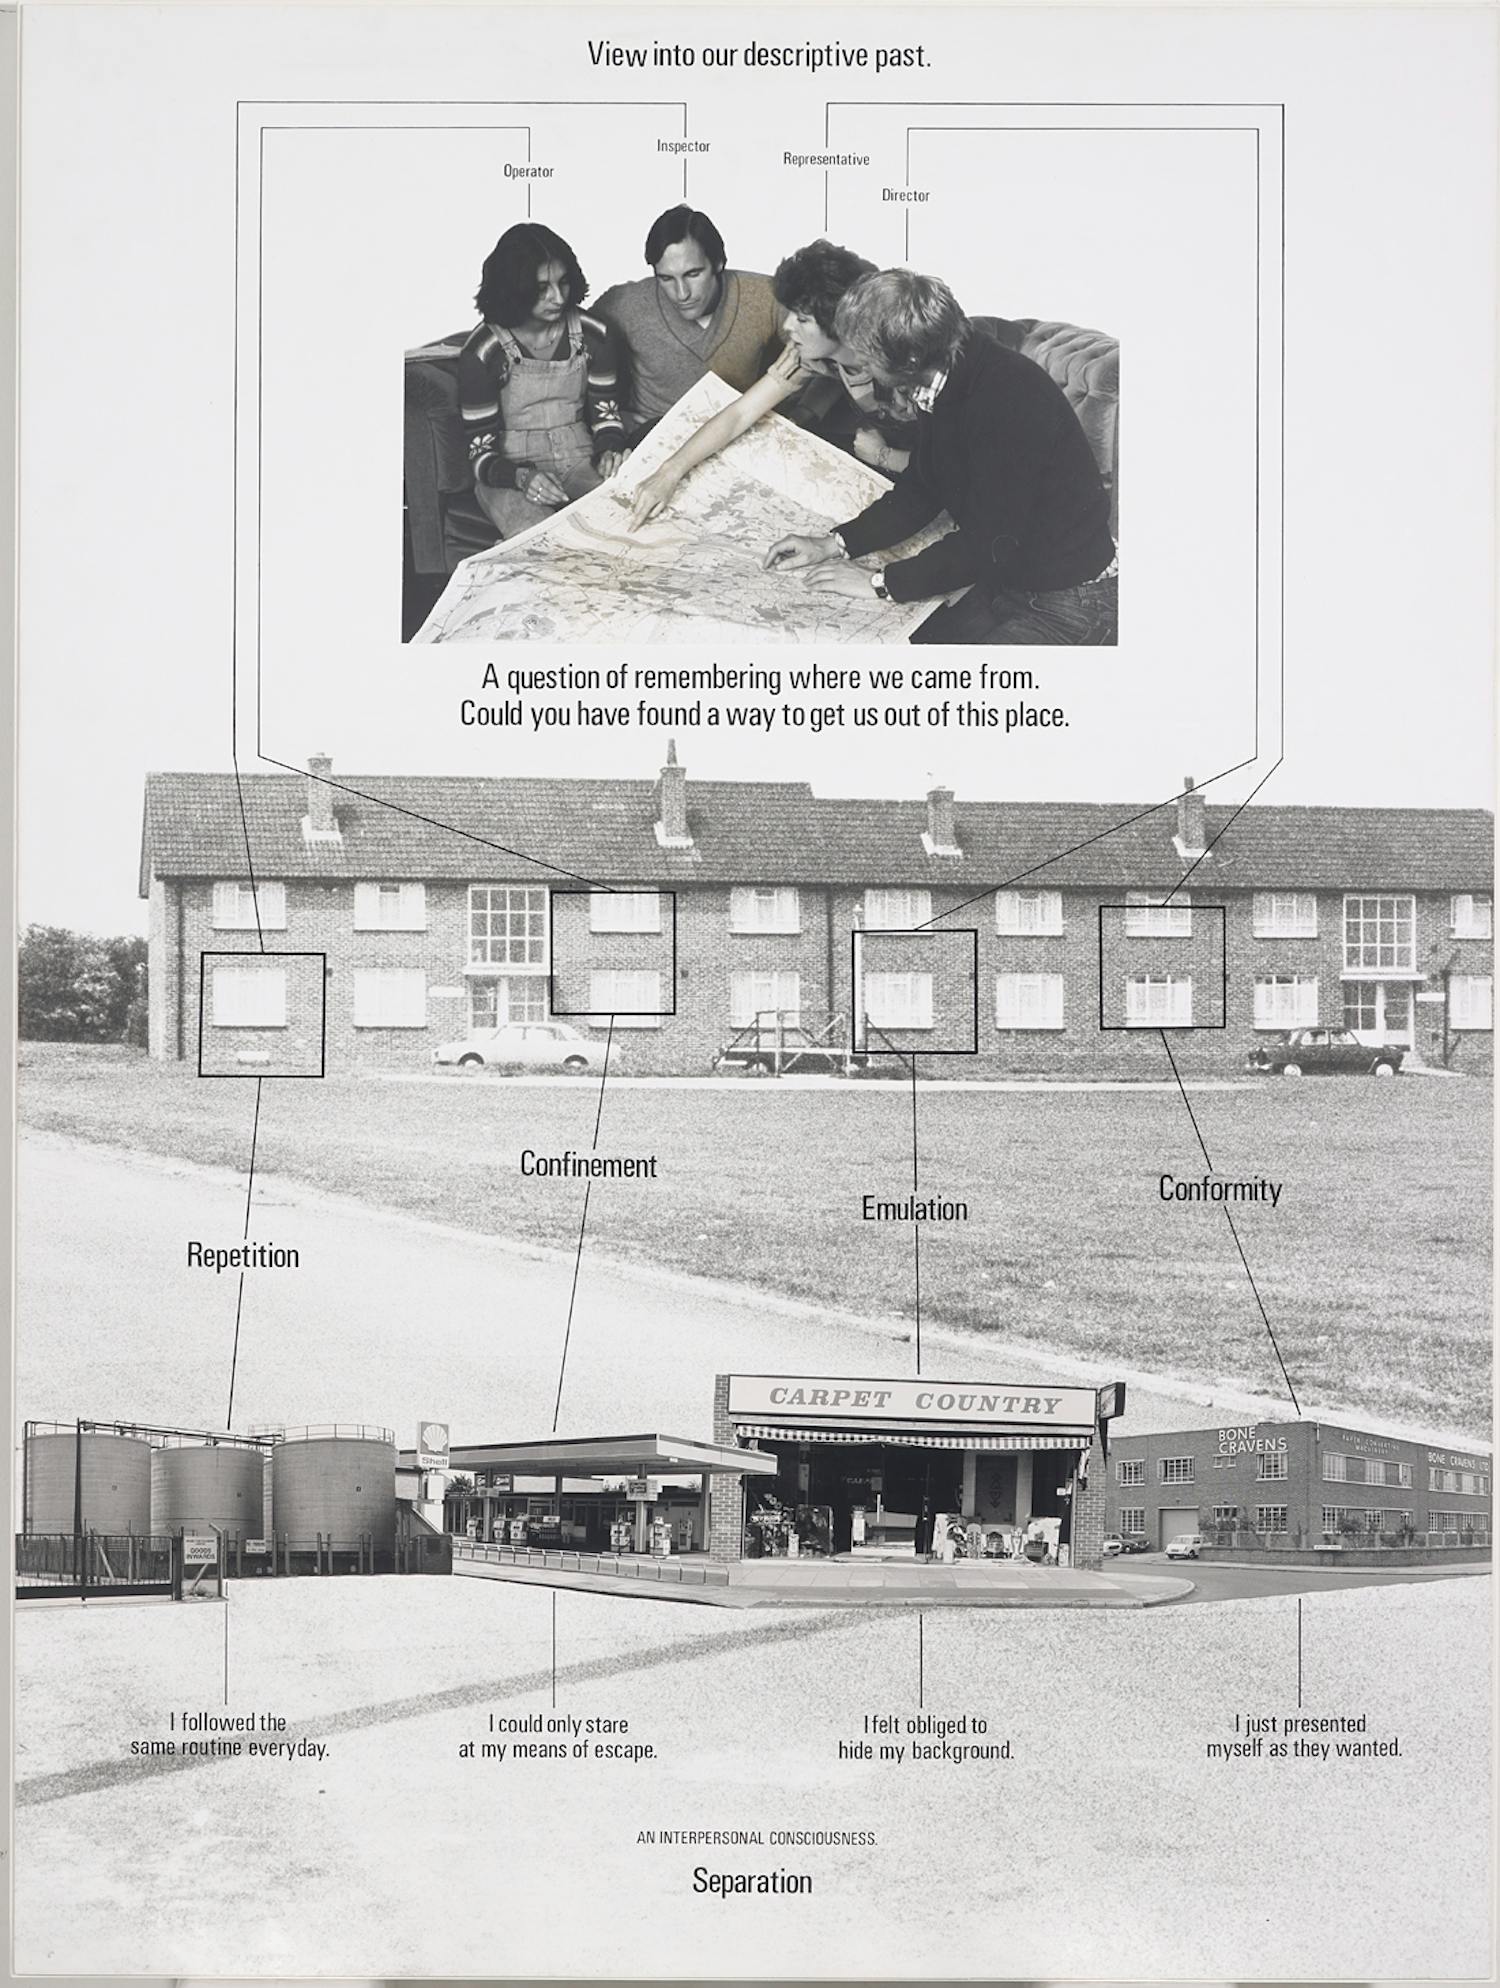 [ID: The three images appear as collages of photographs. On top of each image, a group of people sitting together on a couch, leaning over a table pointing at books and maps. Below them are images of residential and commercial buildings. The group of people is connected to the buildings by geometric lines running through the images. End of ID]